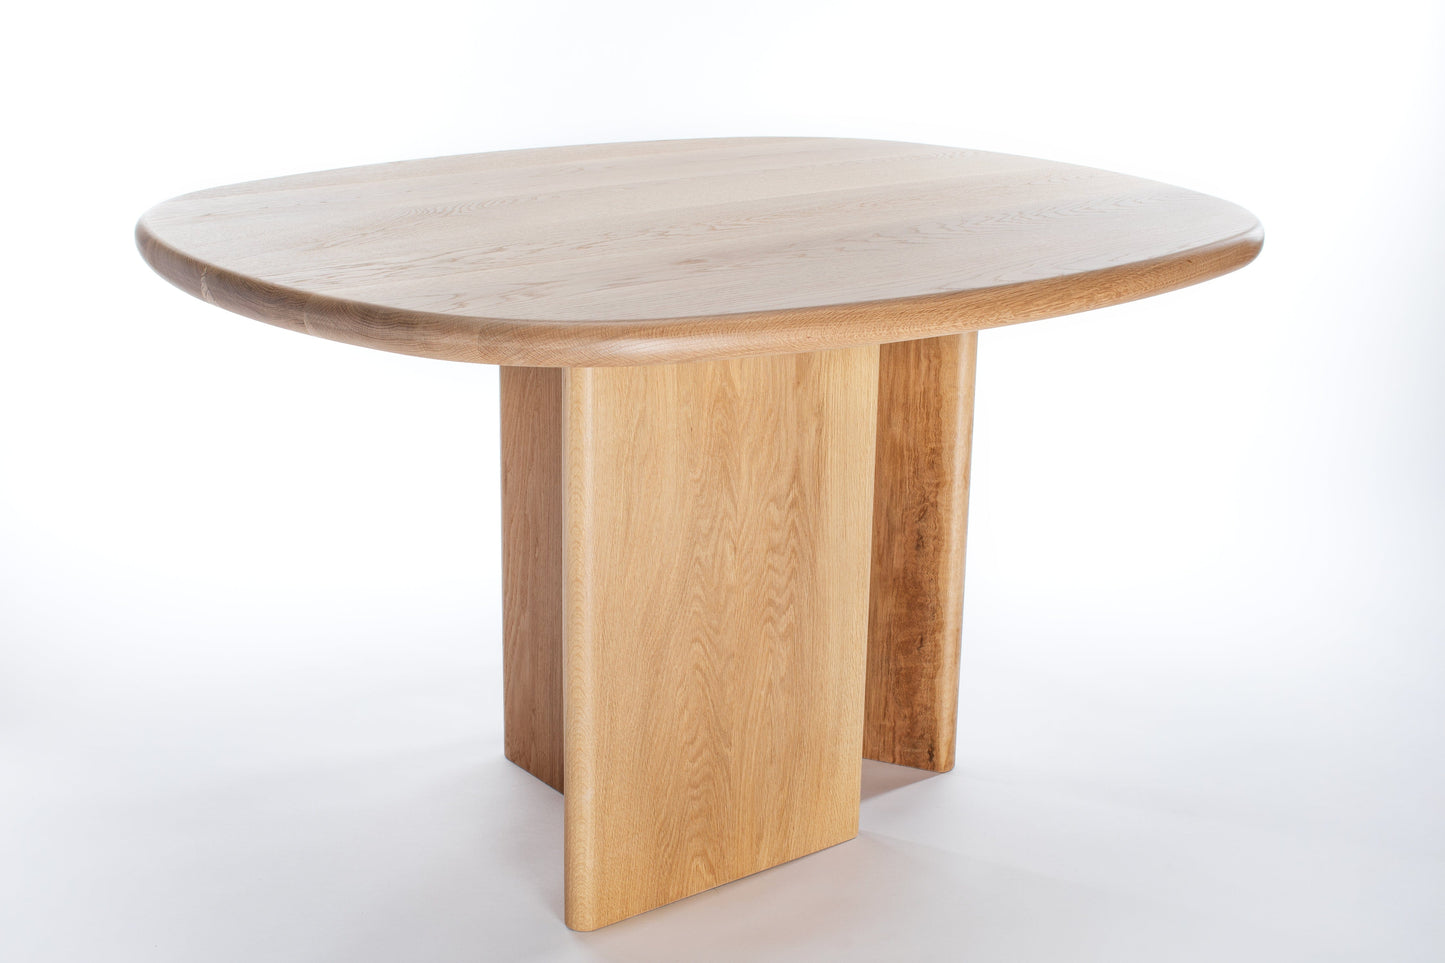 The Carpentry Shop Co. White Oak Oval Dining Table